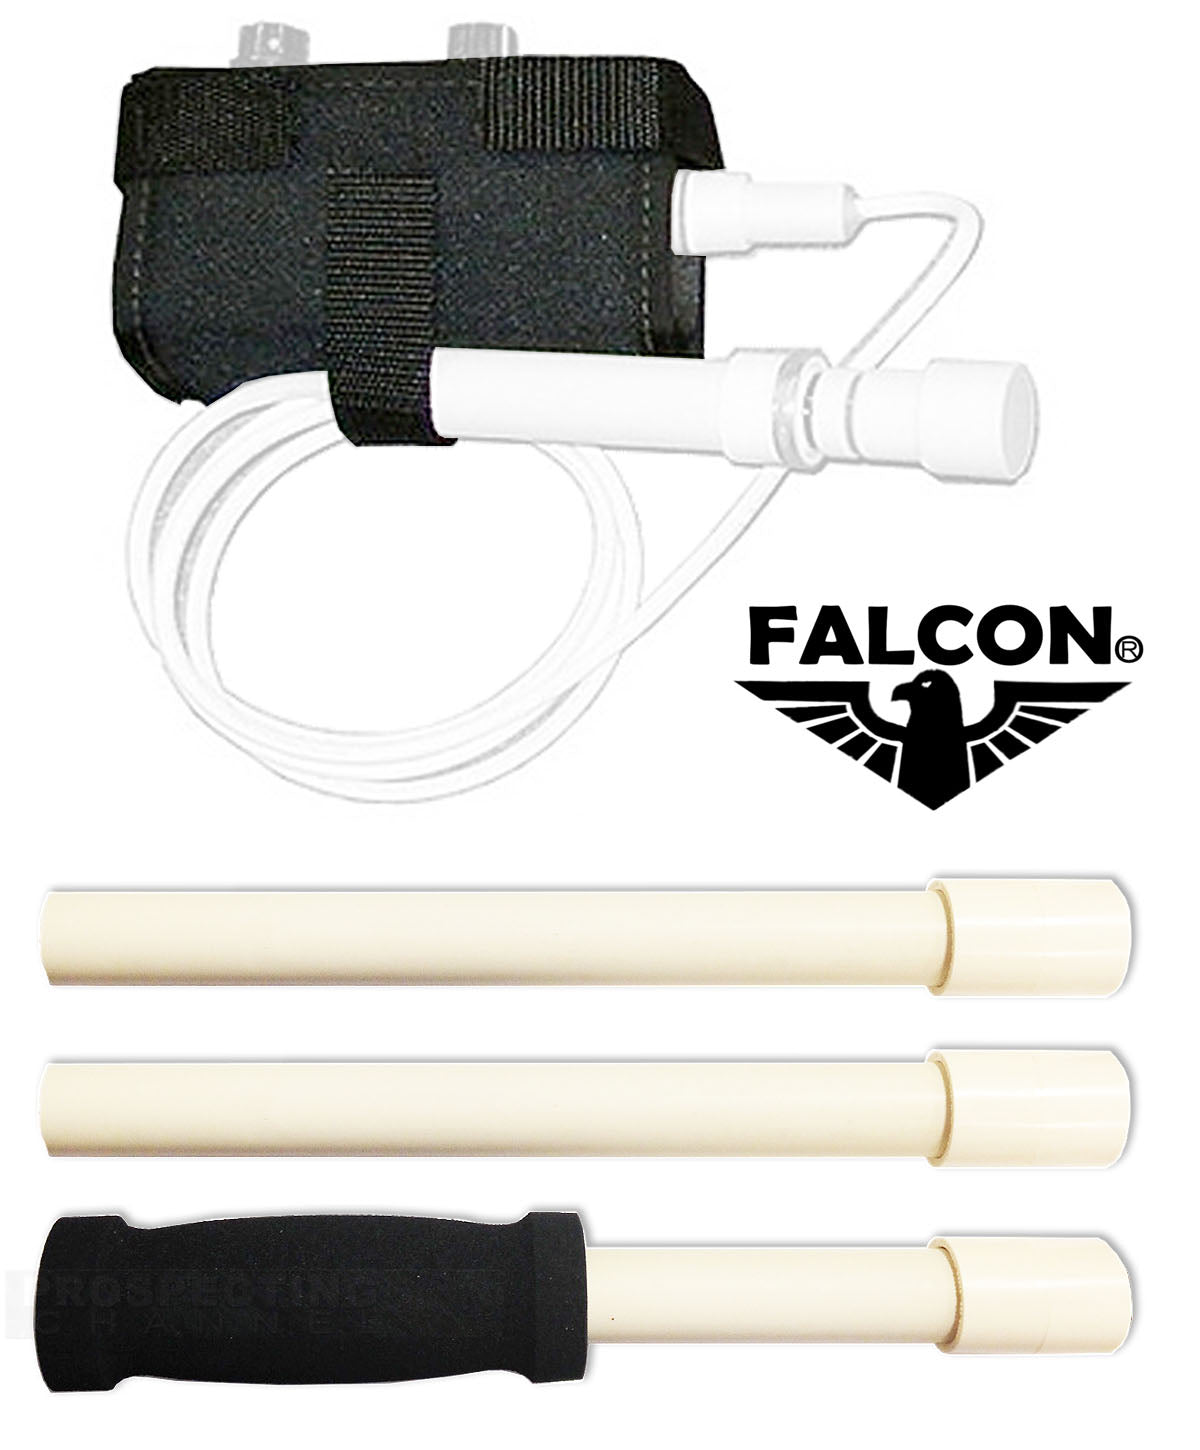 Falcon MD20 Metal Detector Holster Handle How to DVD Pro Package